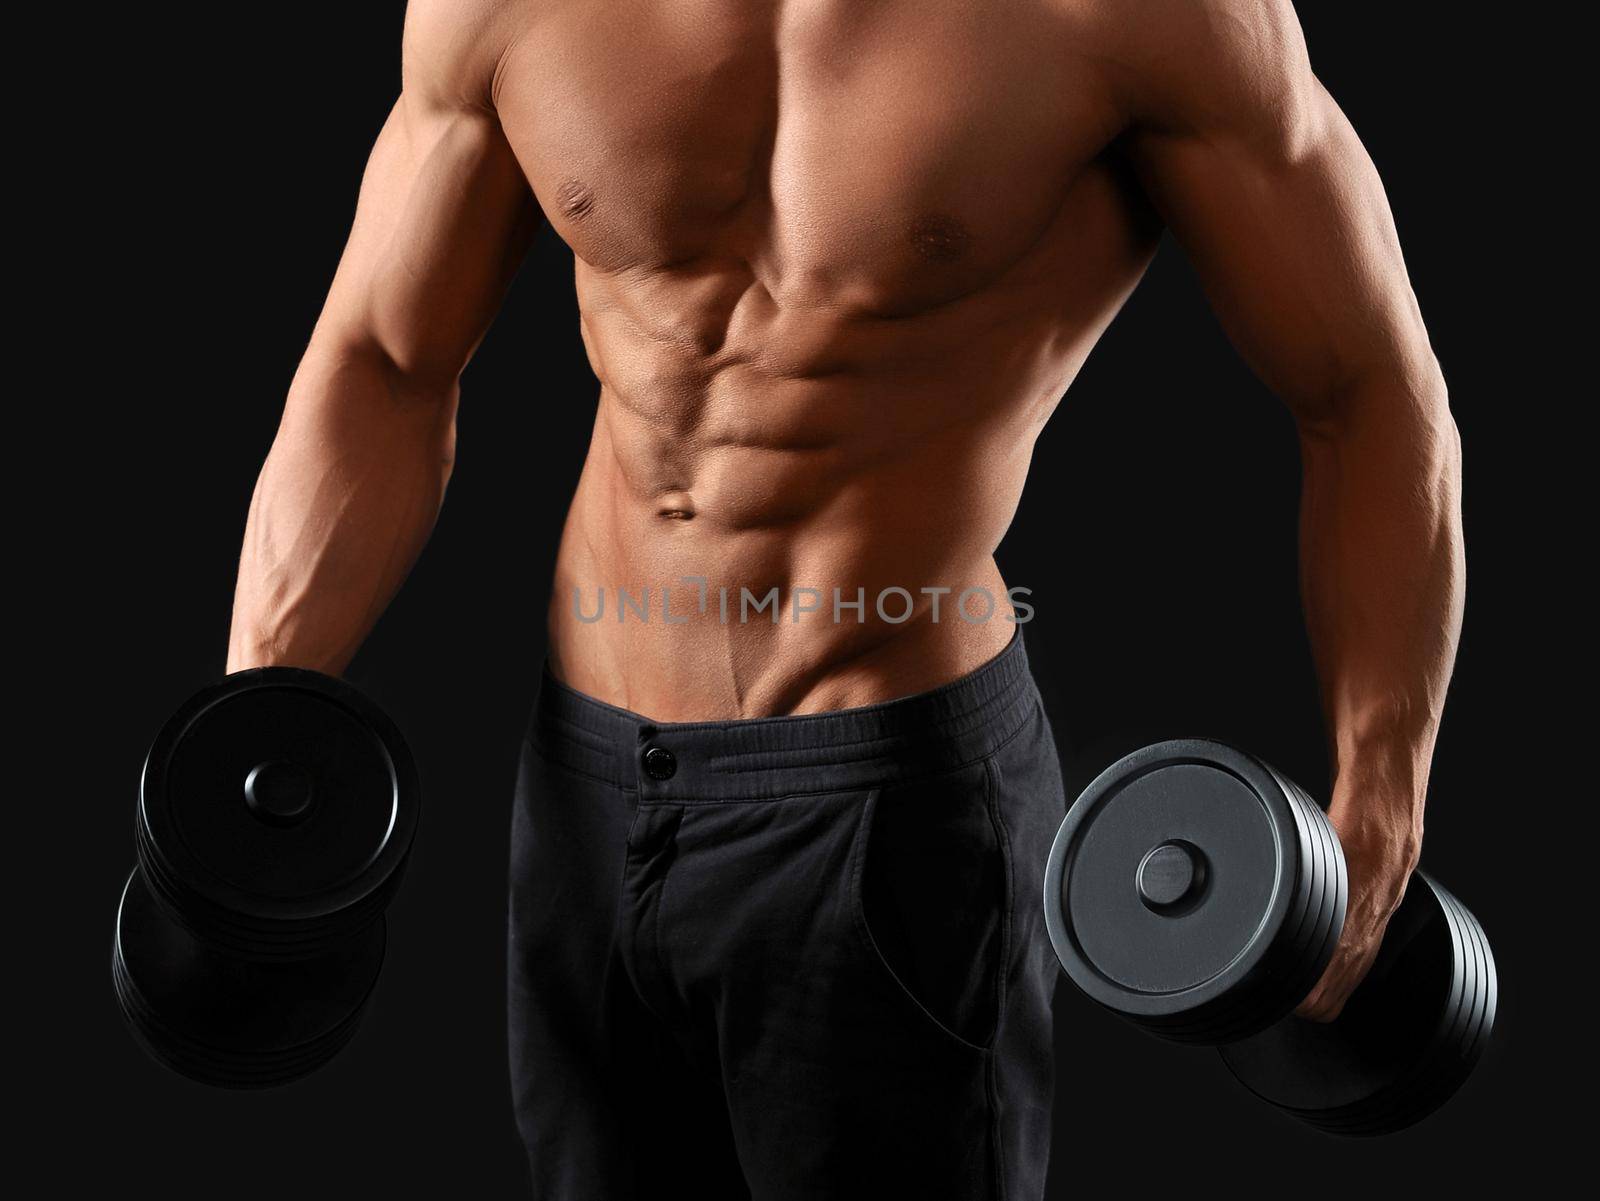 Sport is a lifestyle. Cropped studio shot of a ripped man working out with dumbbells against black background